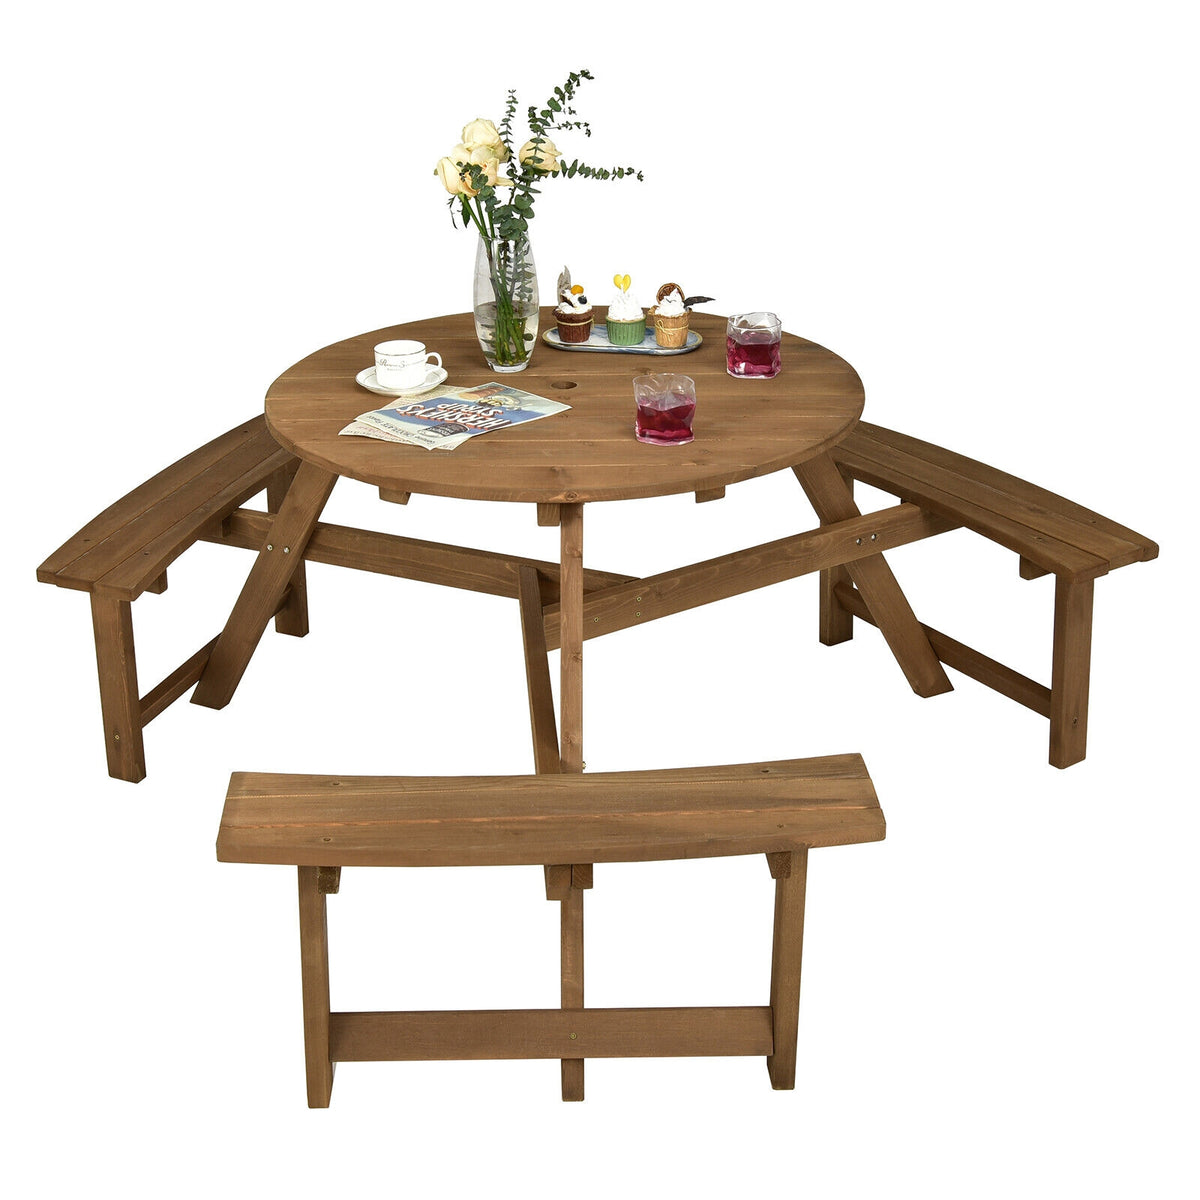 6-person Round Wooden Outdoor Picnic Table Benches Set with Umbrella Hole